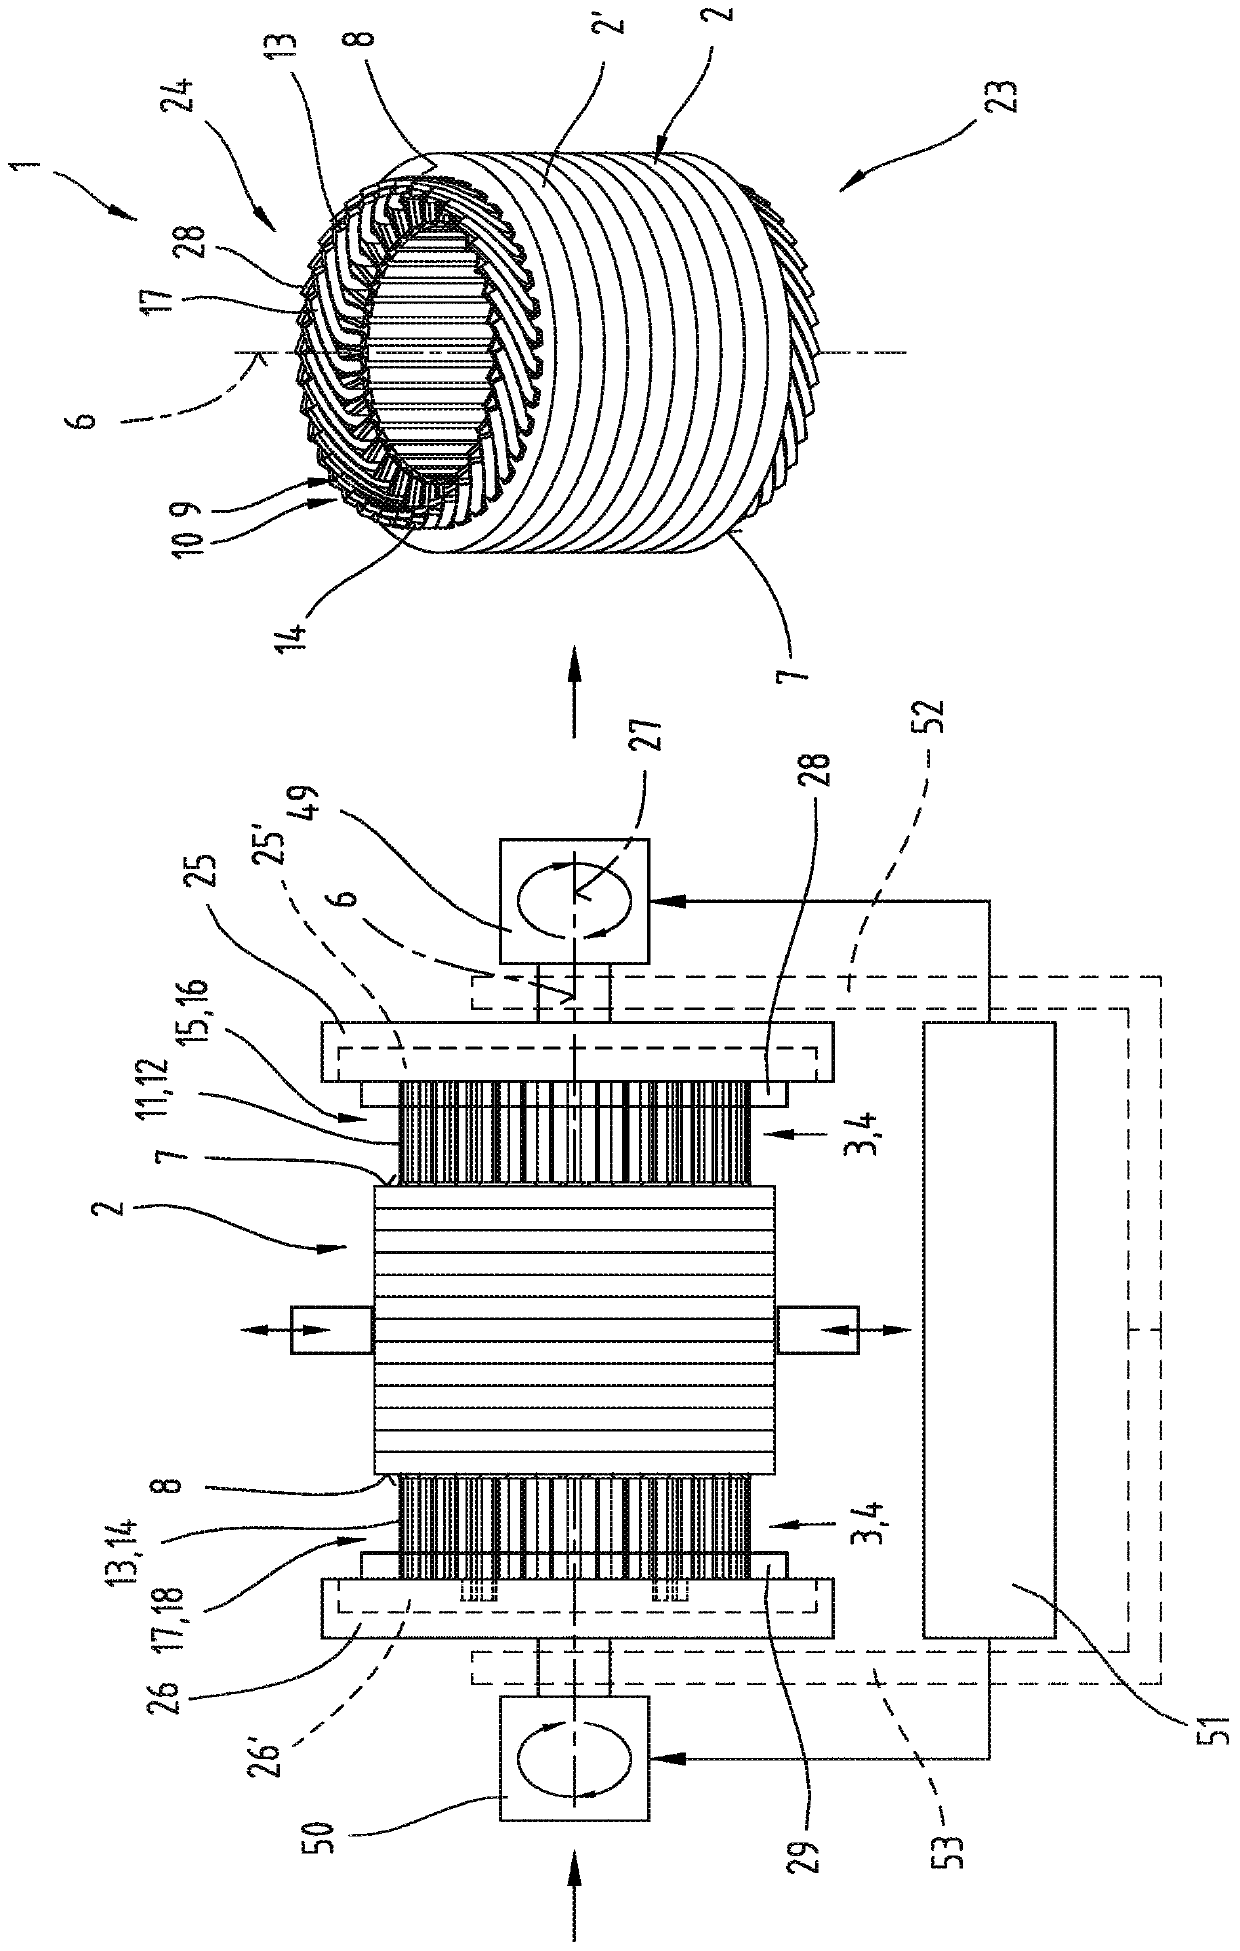 Method and device for automatically producing a stator of an electric machine